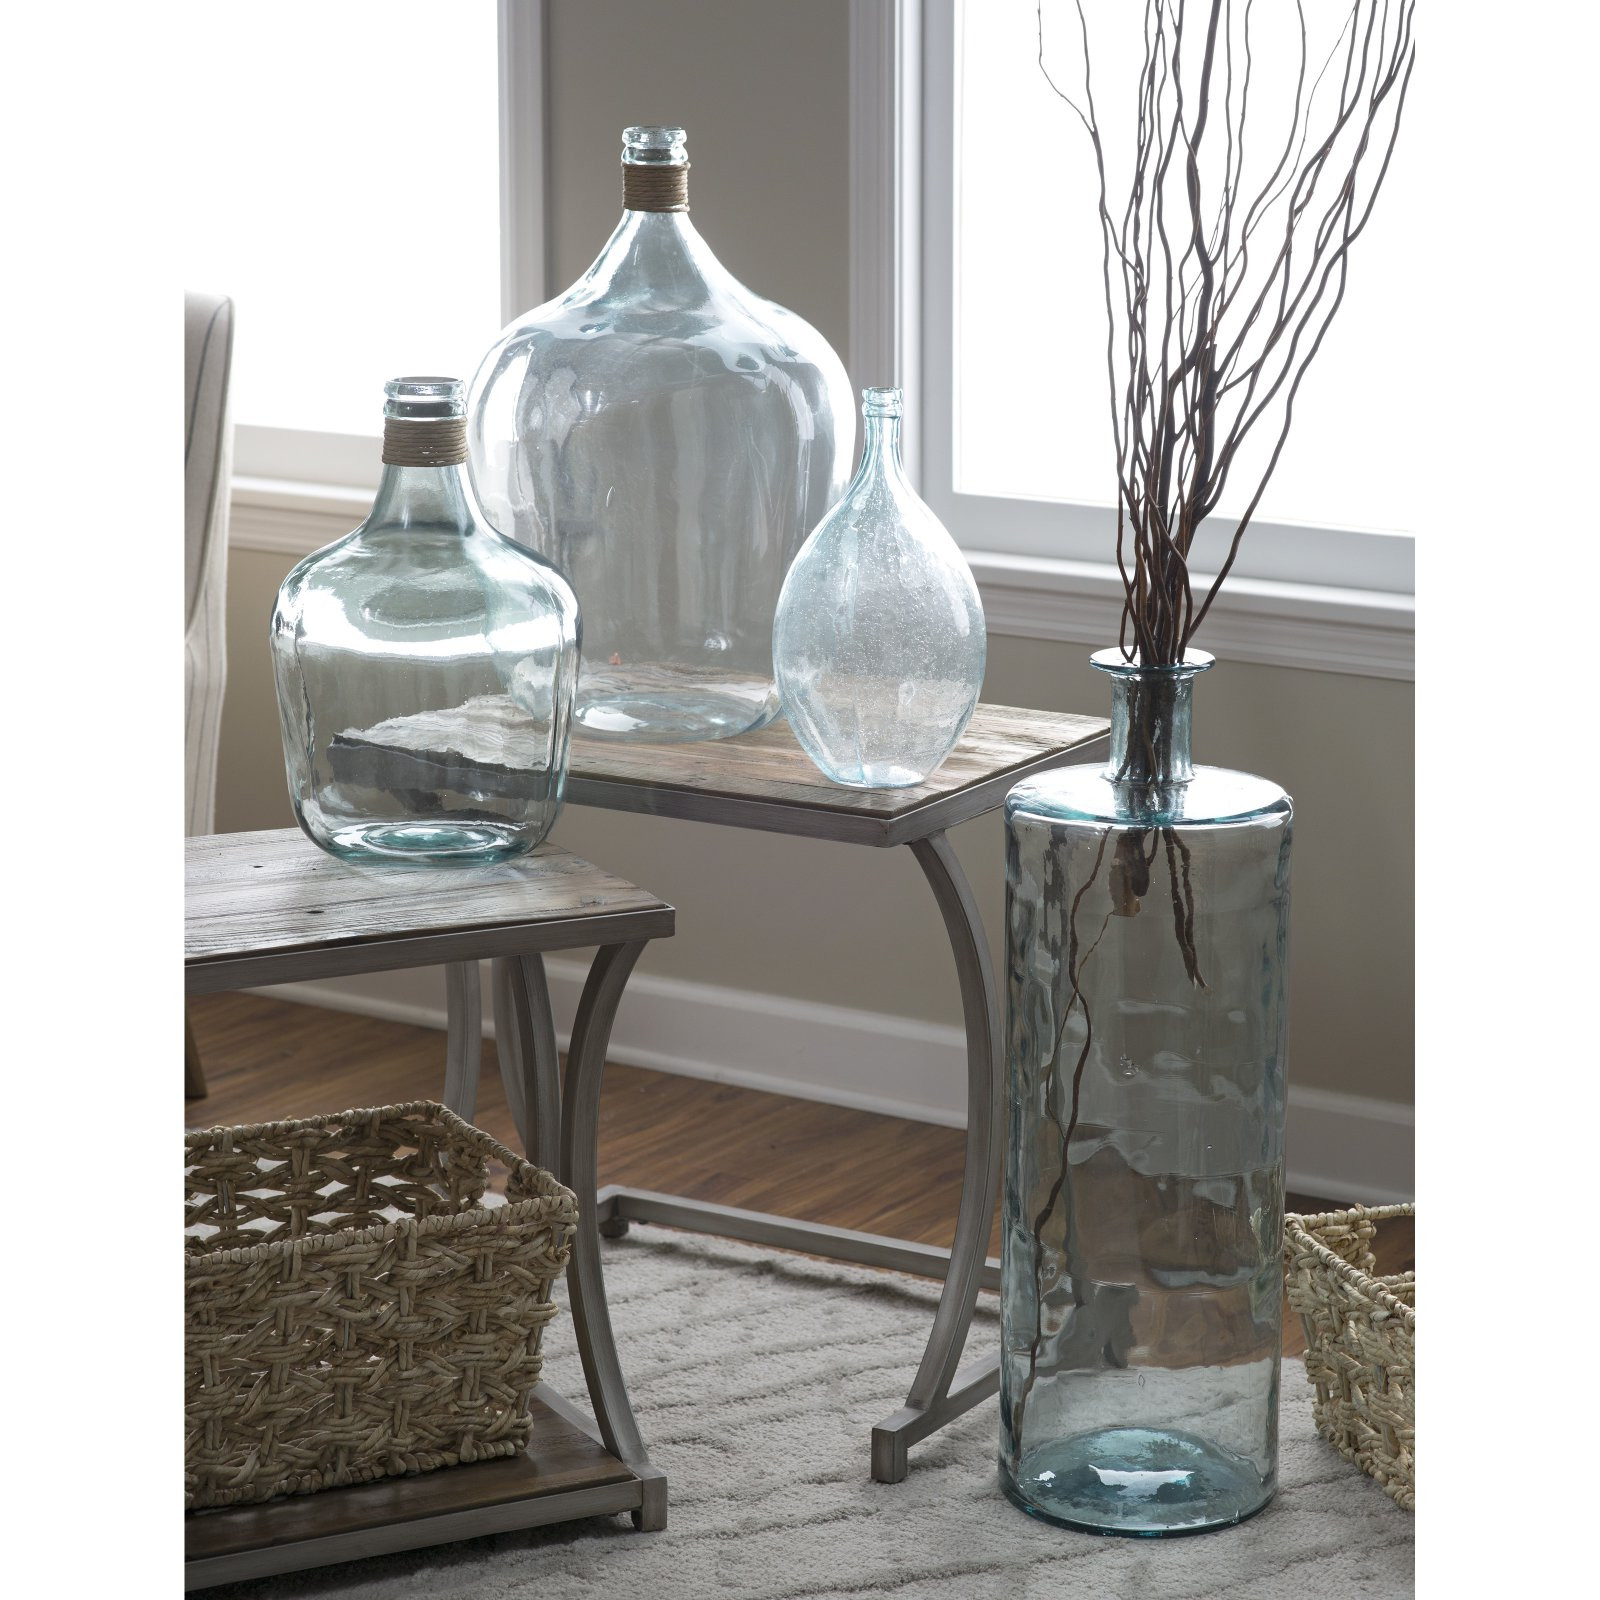 24 attractive Mercer Large Recycled Glass Vase 2022 free download mercer large recycled glass vase of attractive boccioni small recycled glass jug walmart com regarding ae159ba1 0e2f 4b03 a5c8 4ad4bddb4b74 1 e88be2dbaa88c5bb91d2e94dc093887d